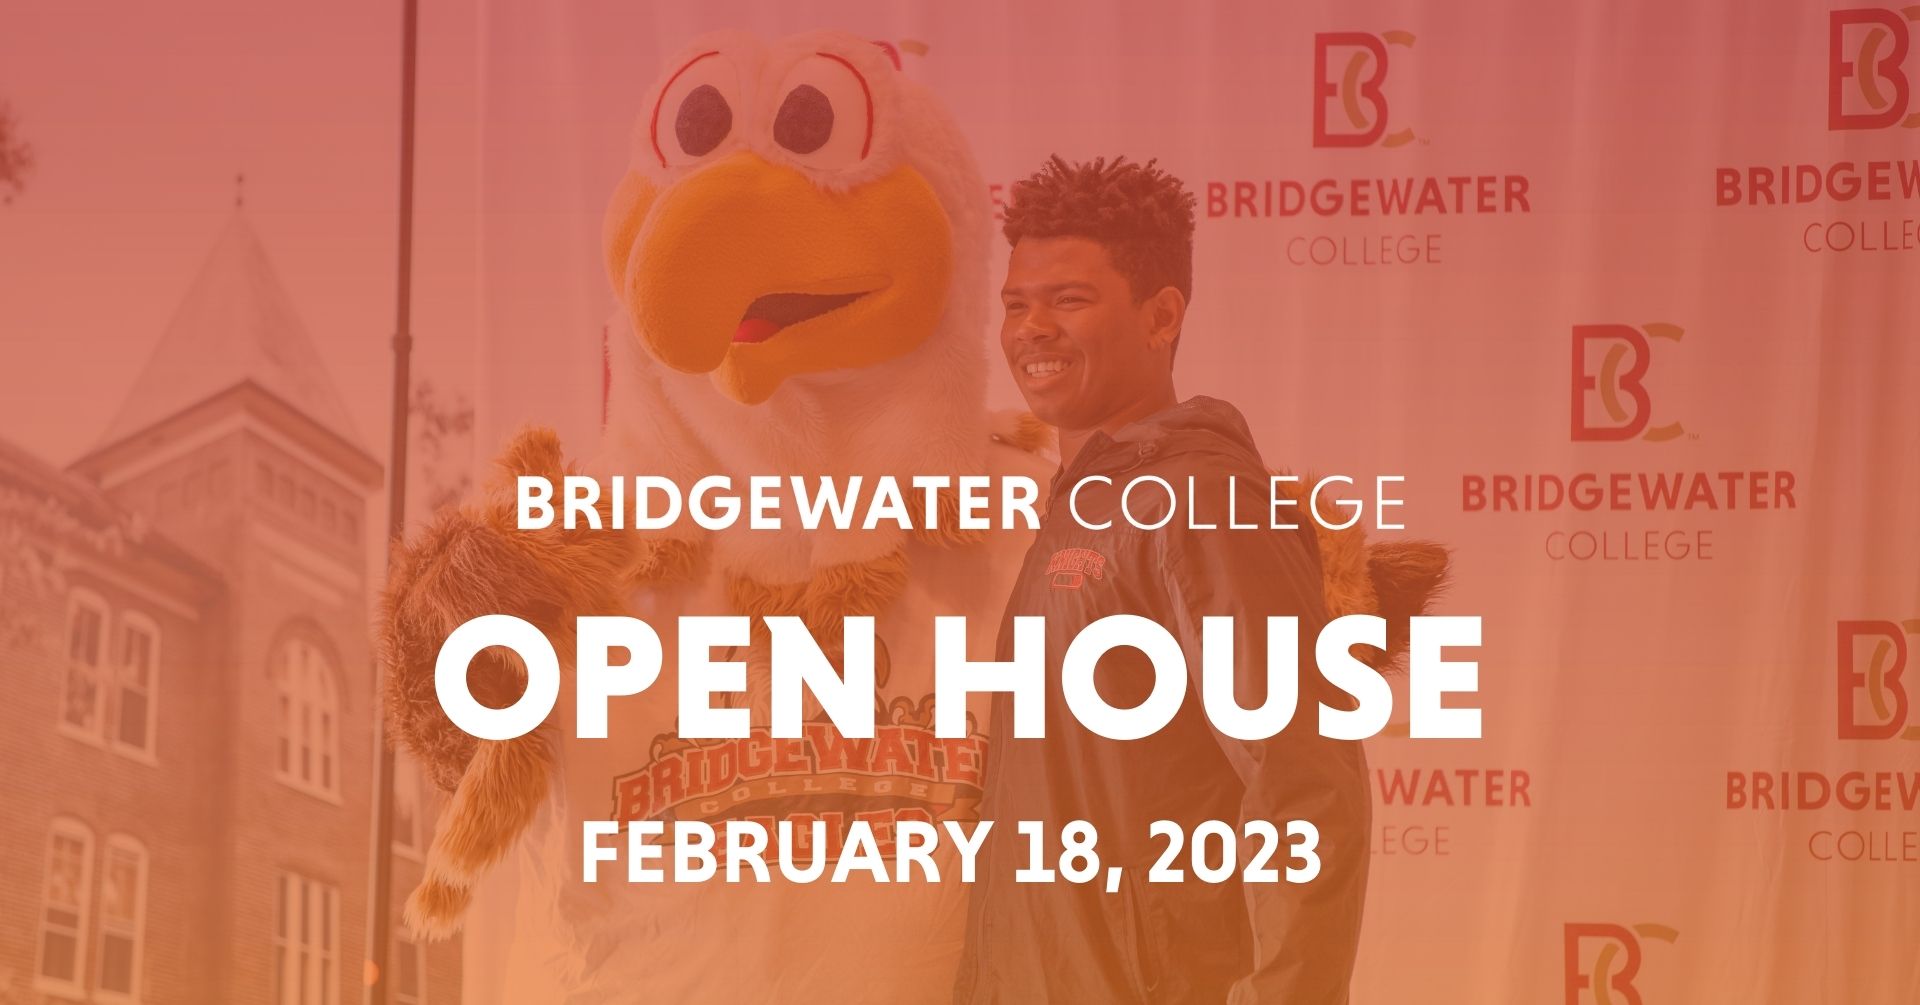 Student posing with mascot, Ernie at open house with text overlay Bridgewater College; Open House; February 18, 2023